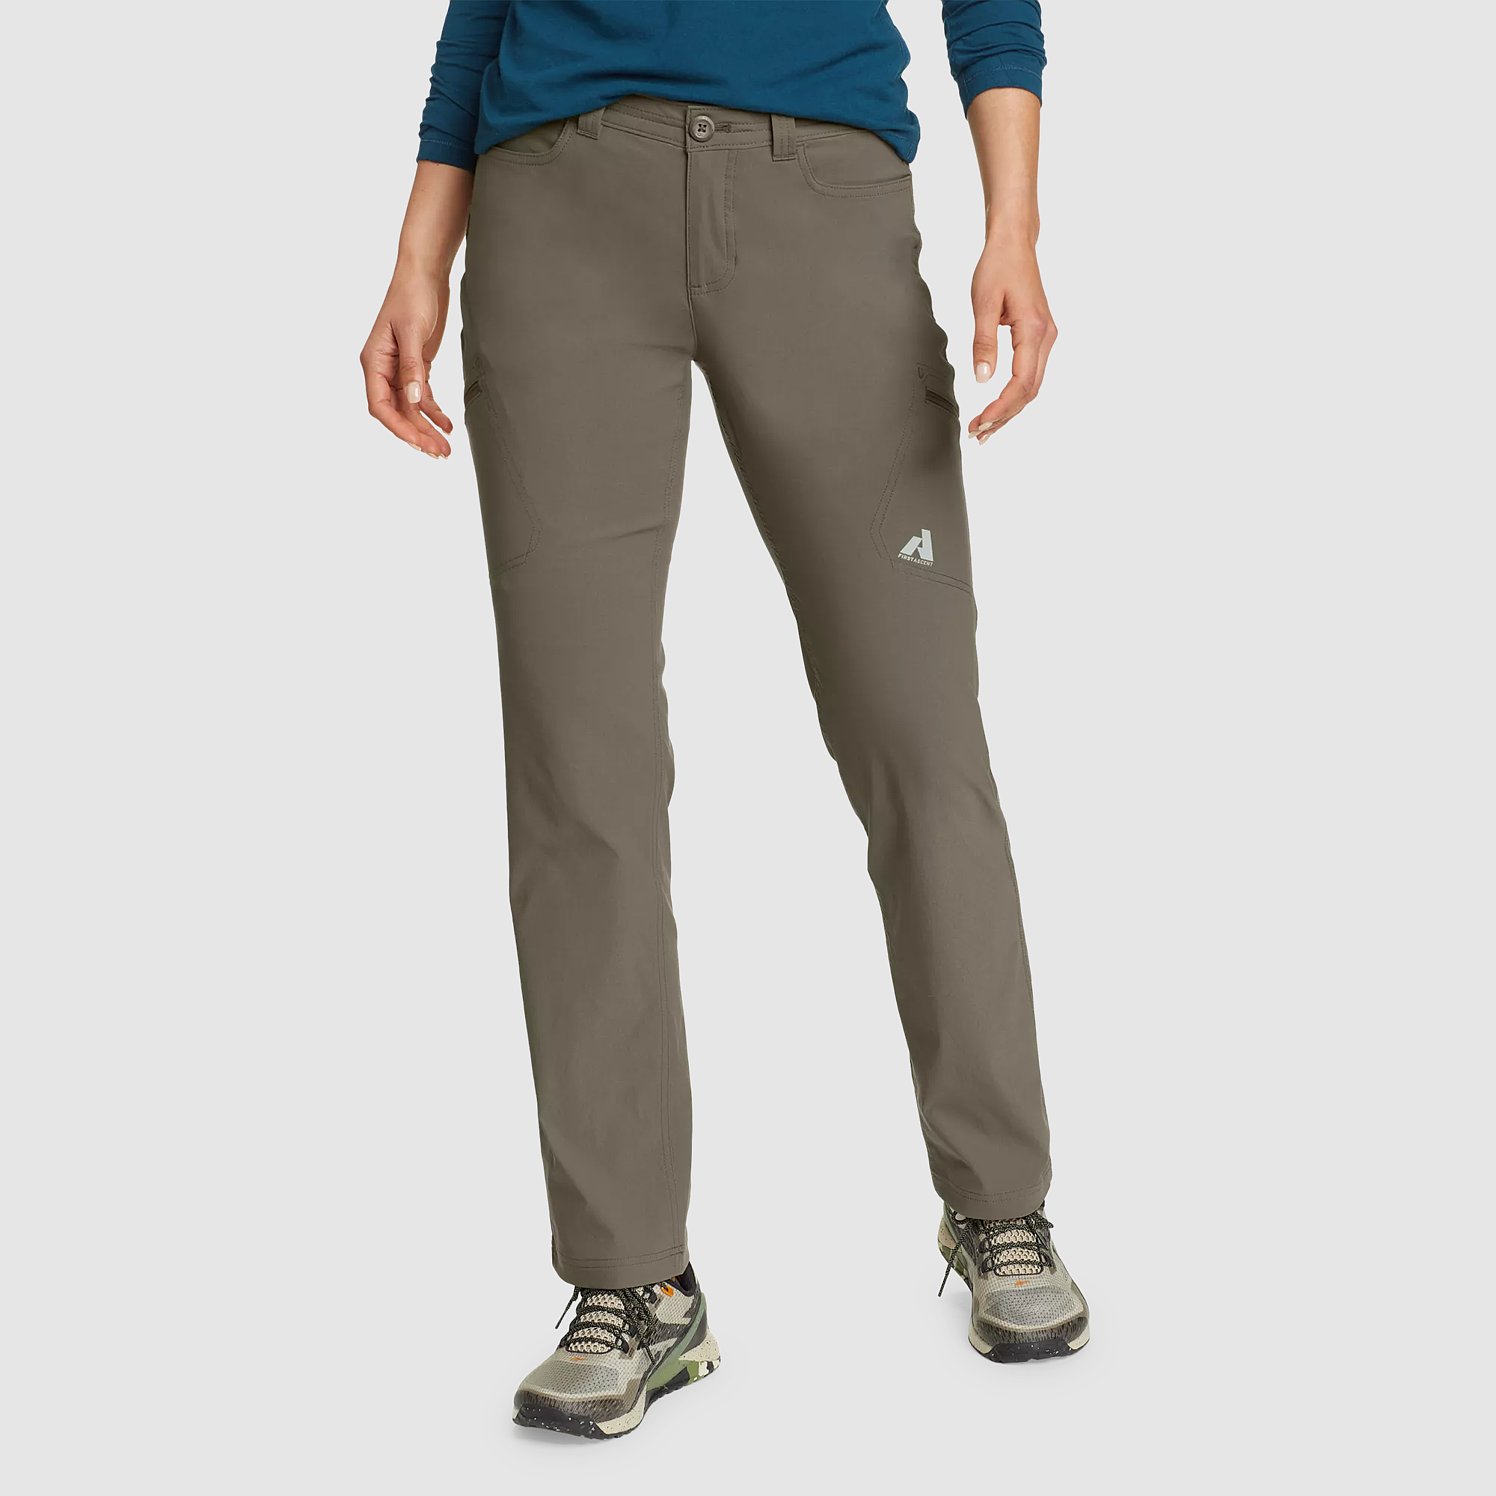 Eddie Bauer First Ascent Guide Pro pants